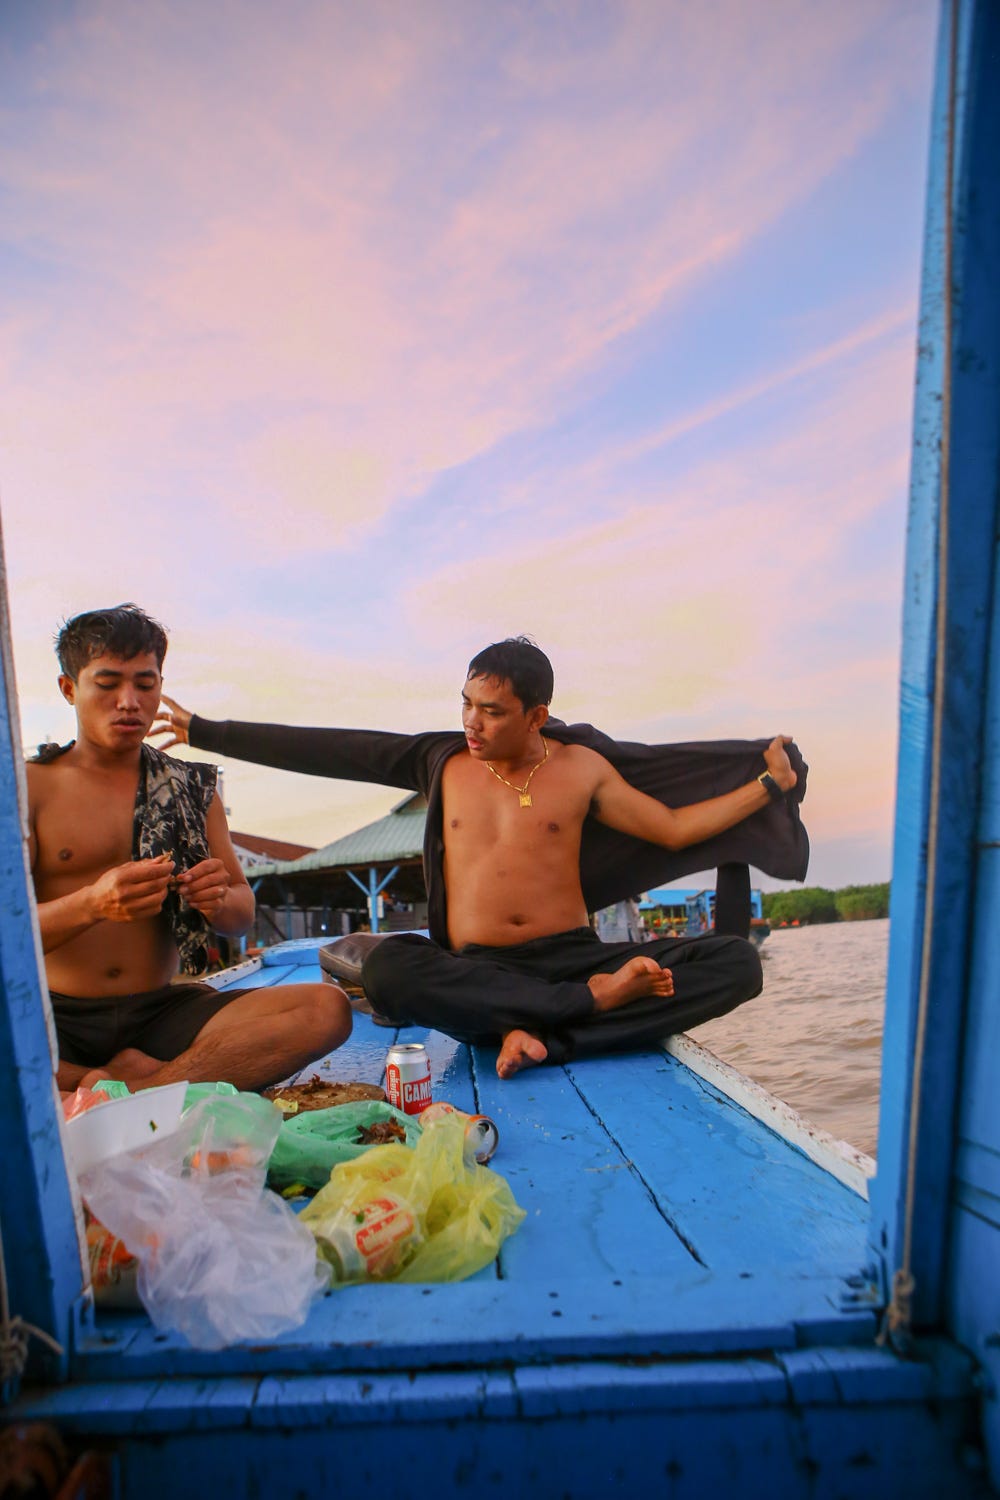 Two young Cambodian men get dressed on the front of a boat with a pink and blue sky in the background. Before them on the deck of the boat sit many plastic bags full of roasted meats.